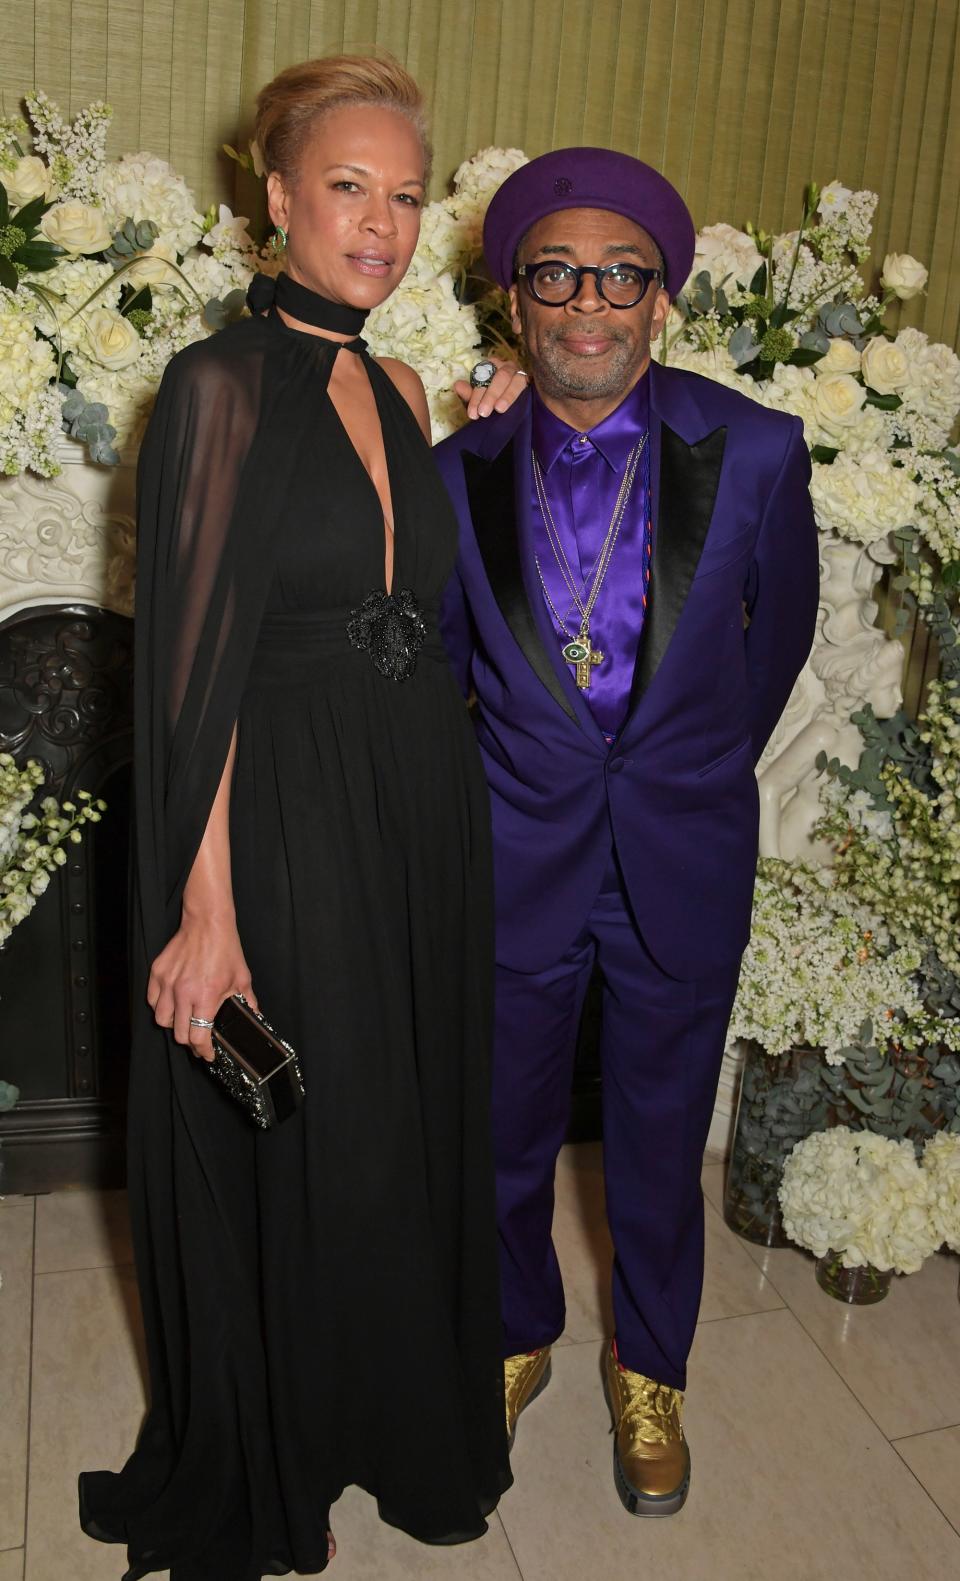 Tonya Lewis Lee and Spike Lee attend the British Vogue and Tiffany & Co. Celebrate Fashion and Film Party at Annabel’s